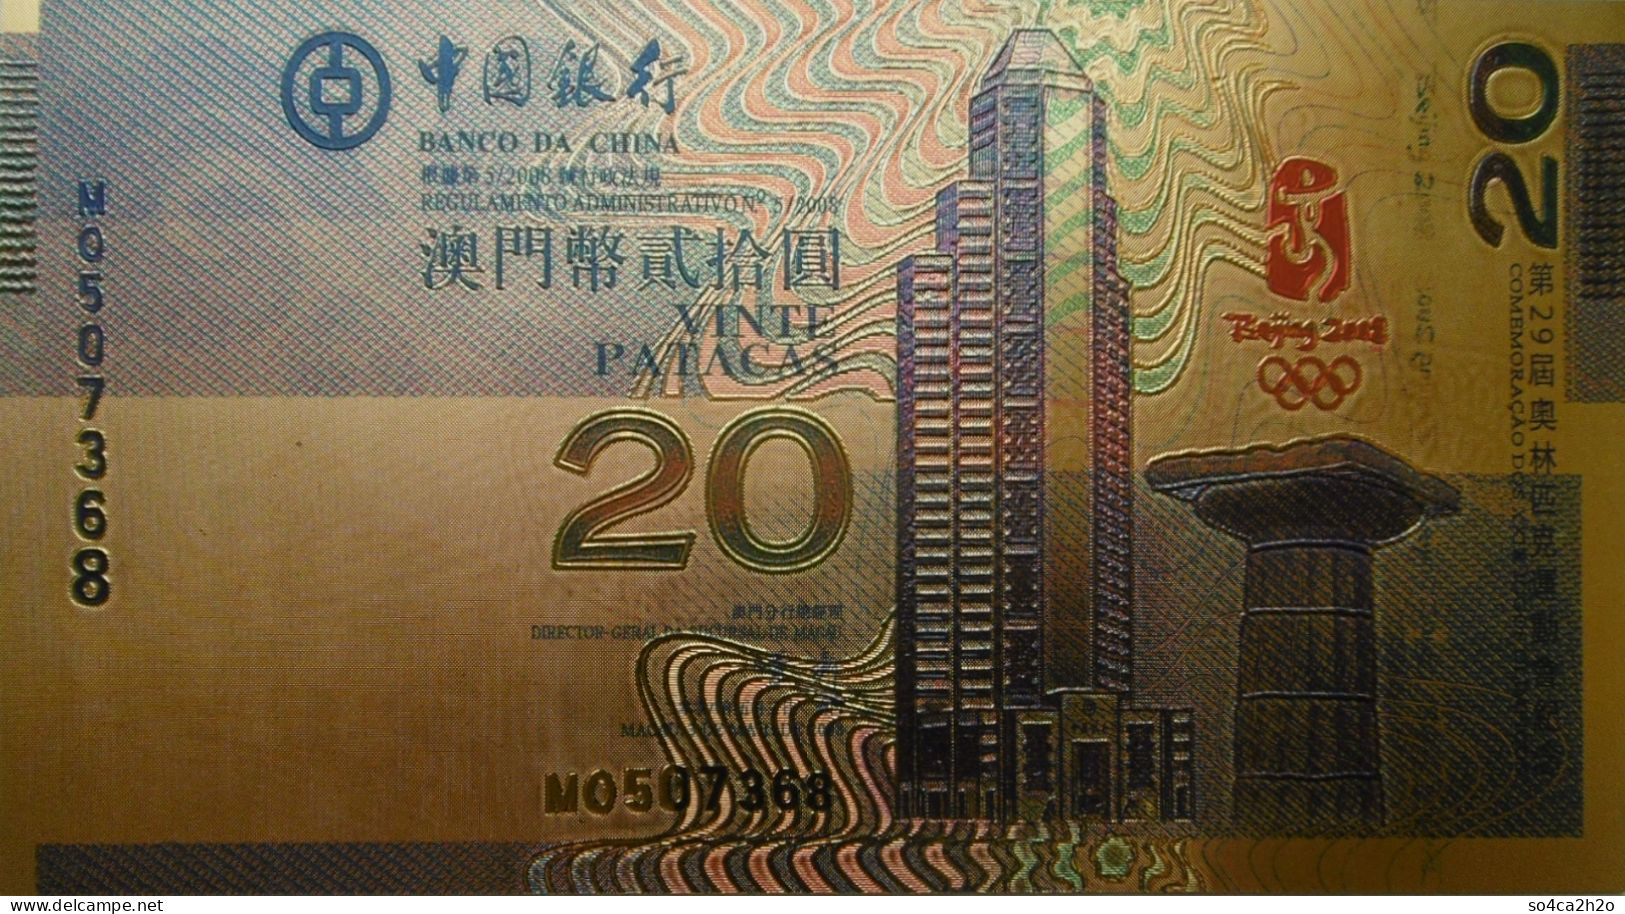 Macao Gold Banknotes Copie 20 Patacas  2008 P107a UNC Olympics Games - Macao